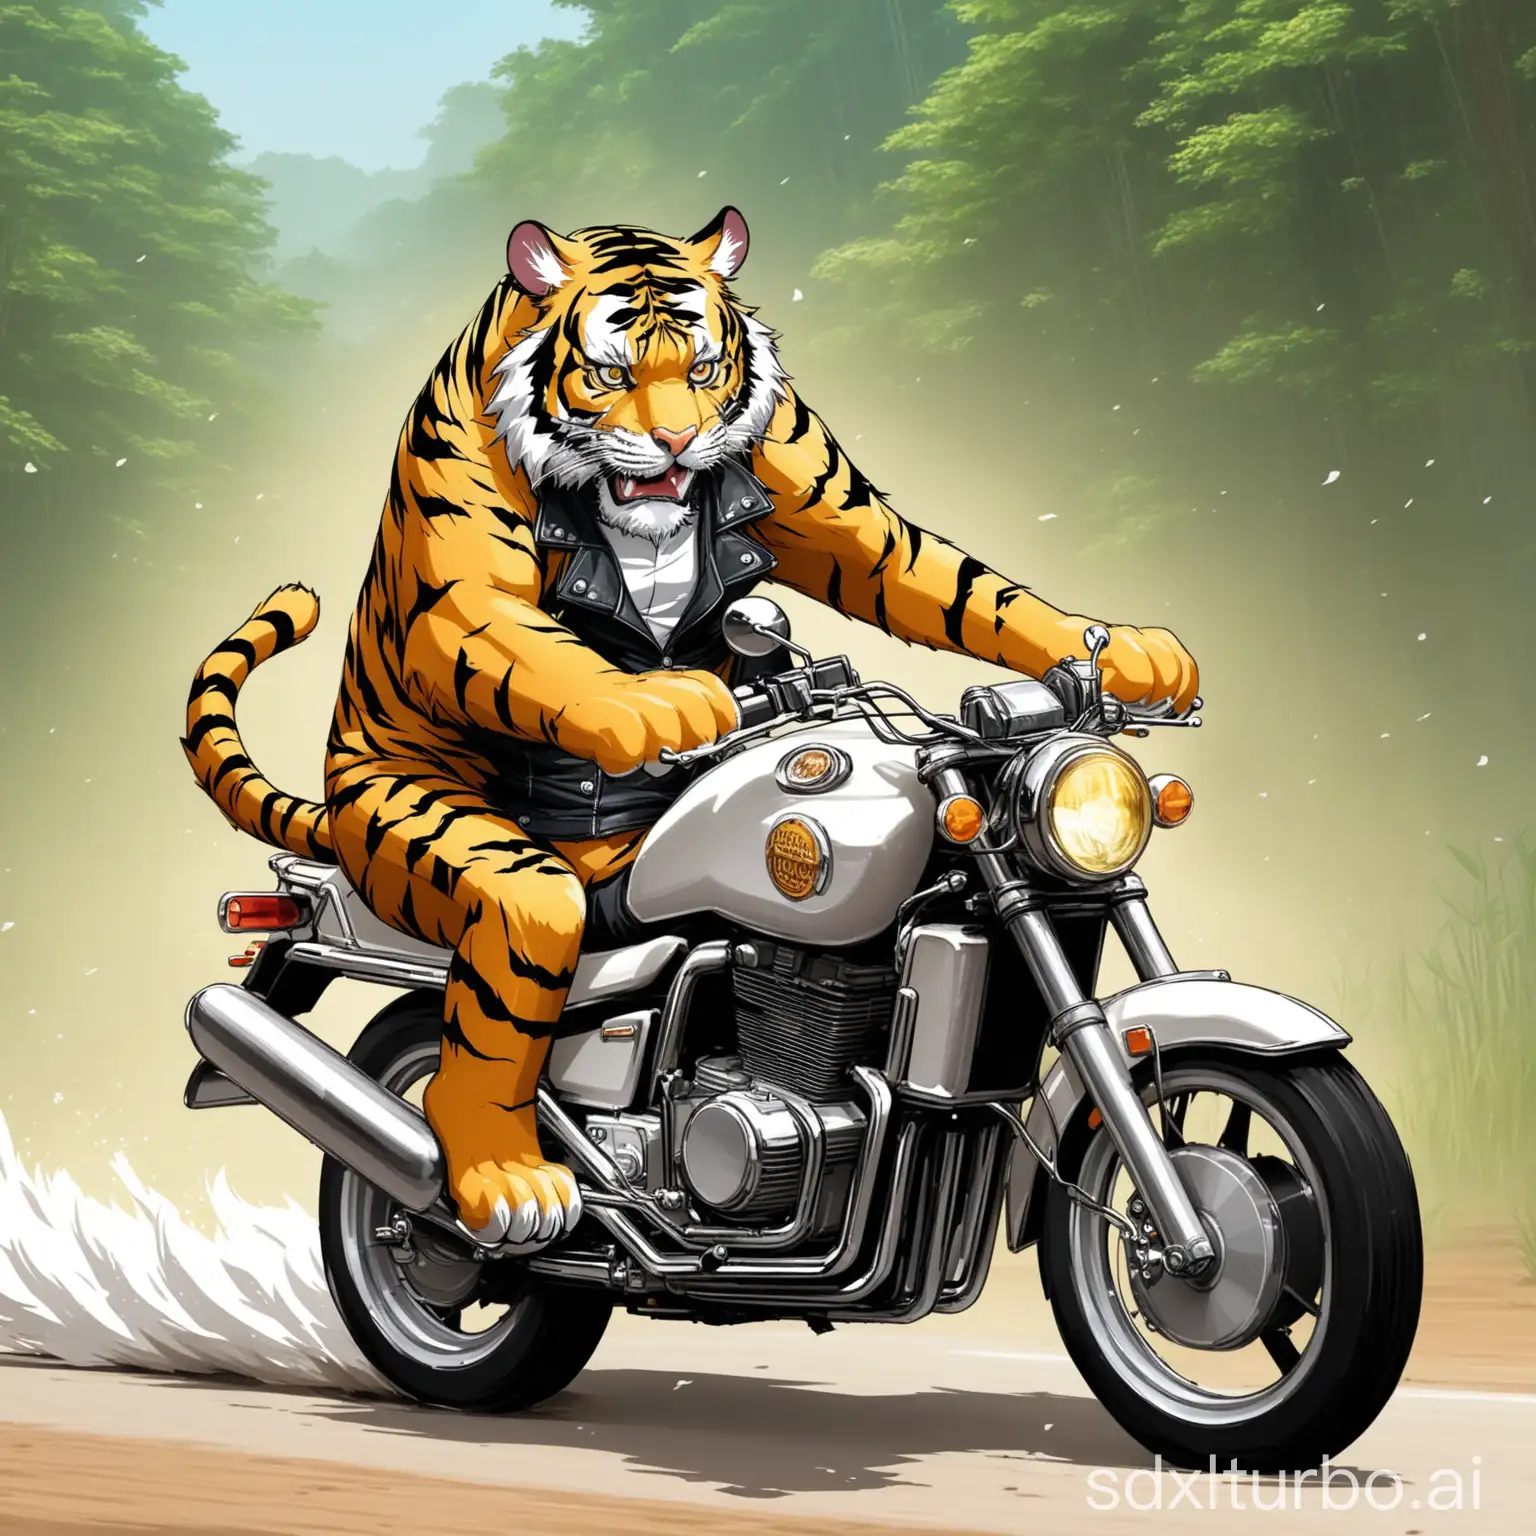 Tiger-Riding-Motorcycle-Majestic-Tiger-Roars-as-It-Speeds-on-a-Vintage-Motorcycle